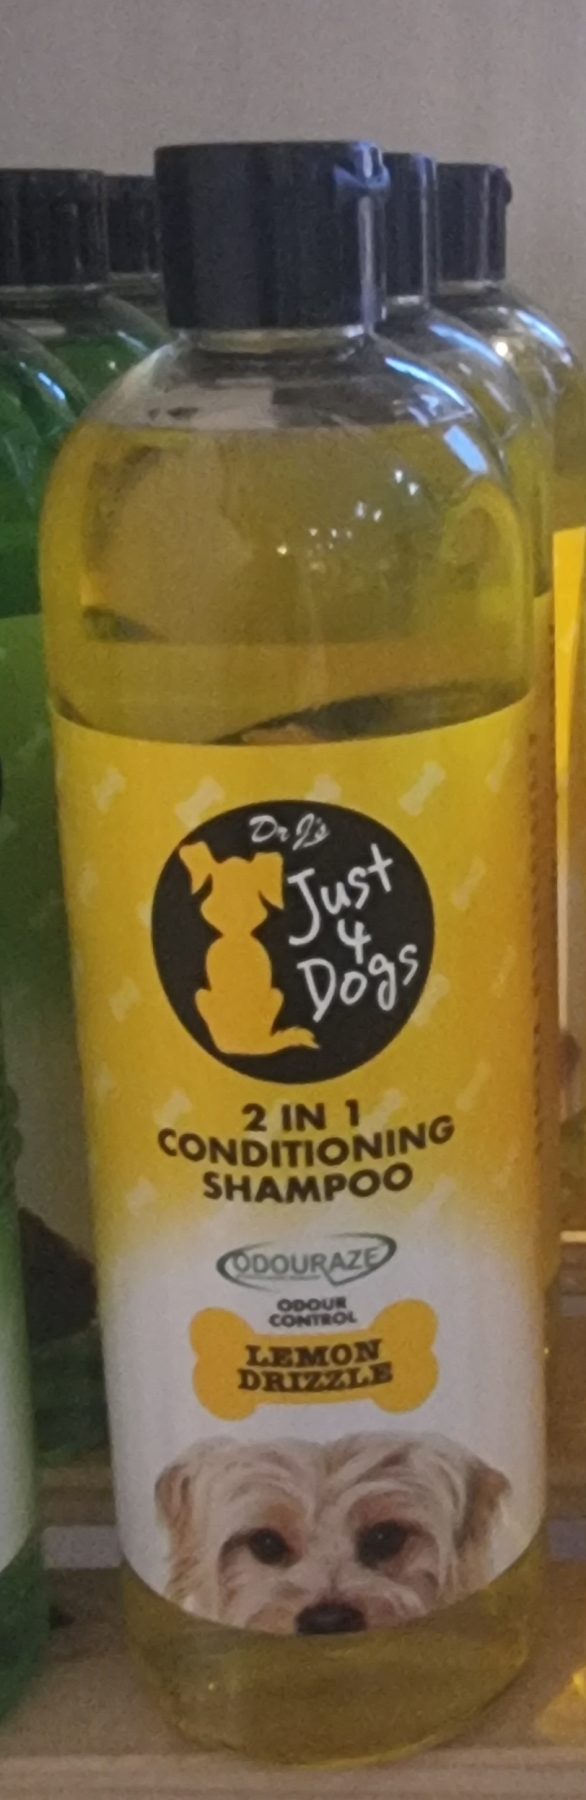 2 in 1 conditioning shampoo- lemon drizzle